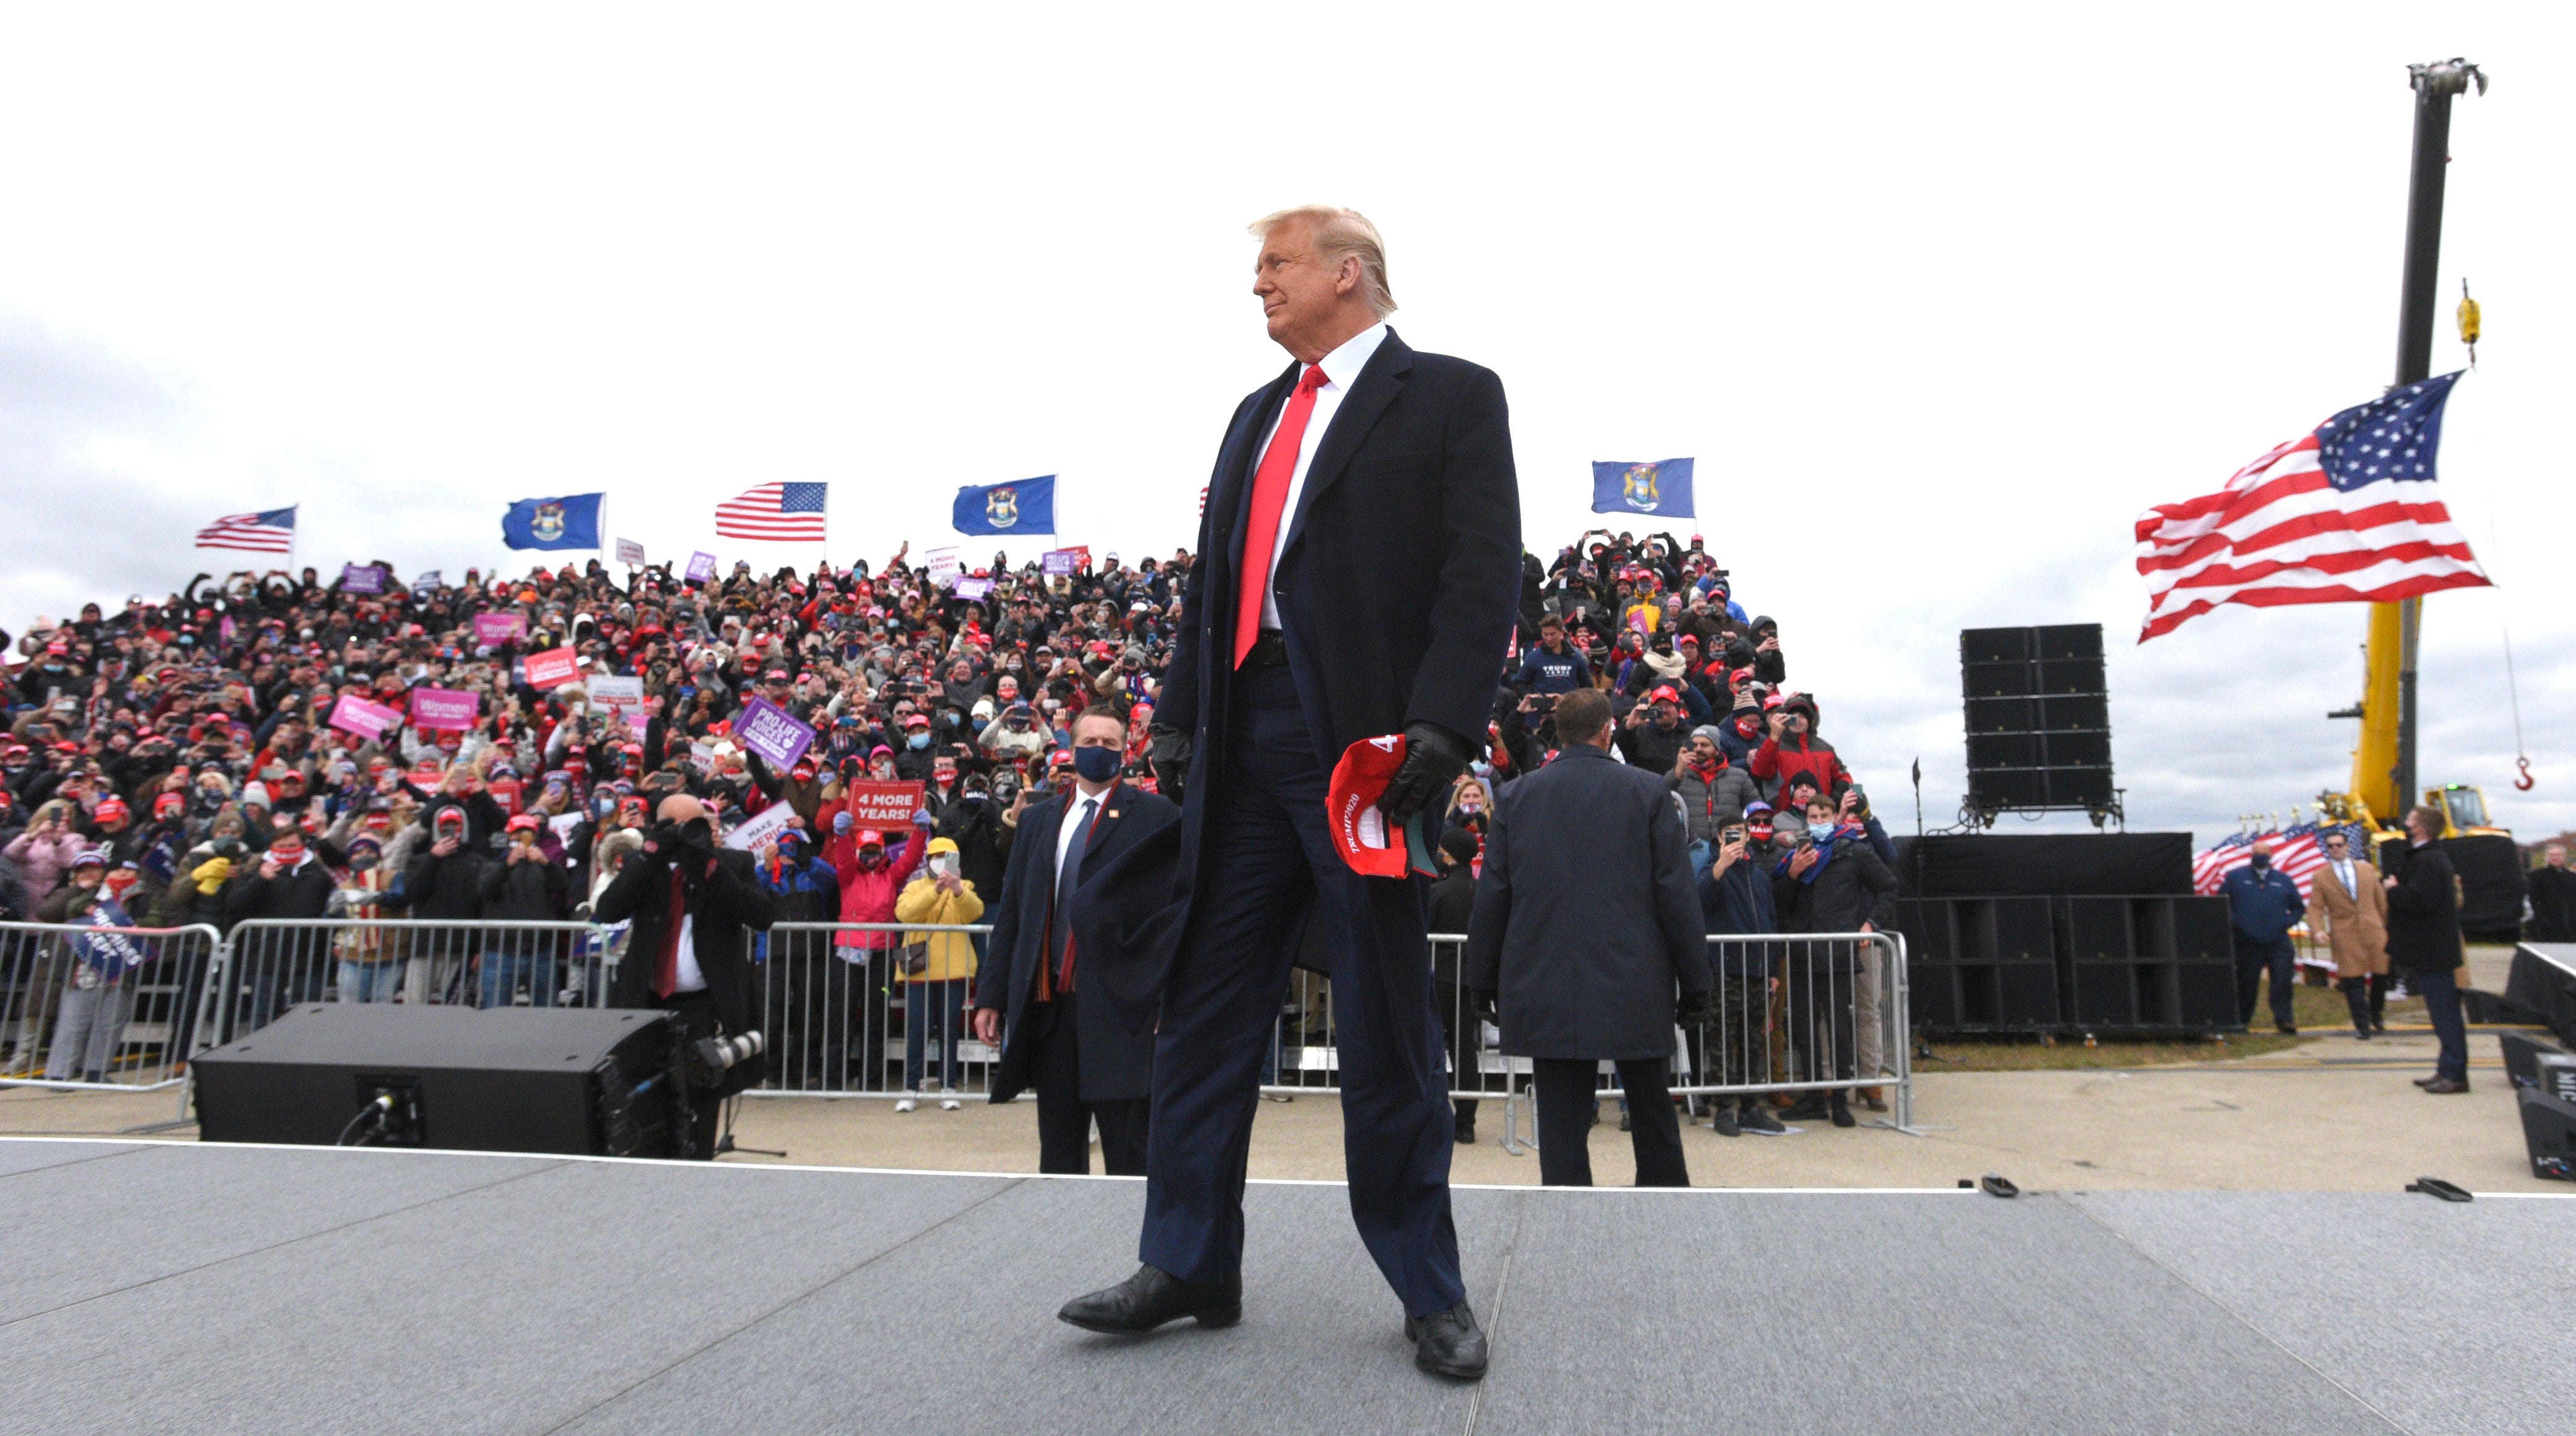 U.S. President Donald Trump takes the stage to speak to supporters at the Oakland International Airport in Waterford Twp., Friday, October 30, 2020, for his Make America Great Again Victory Rally.